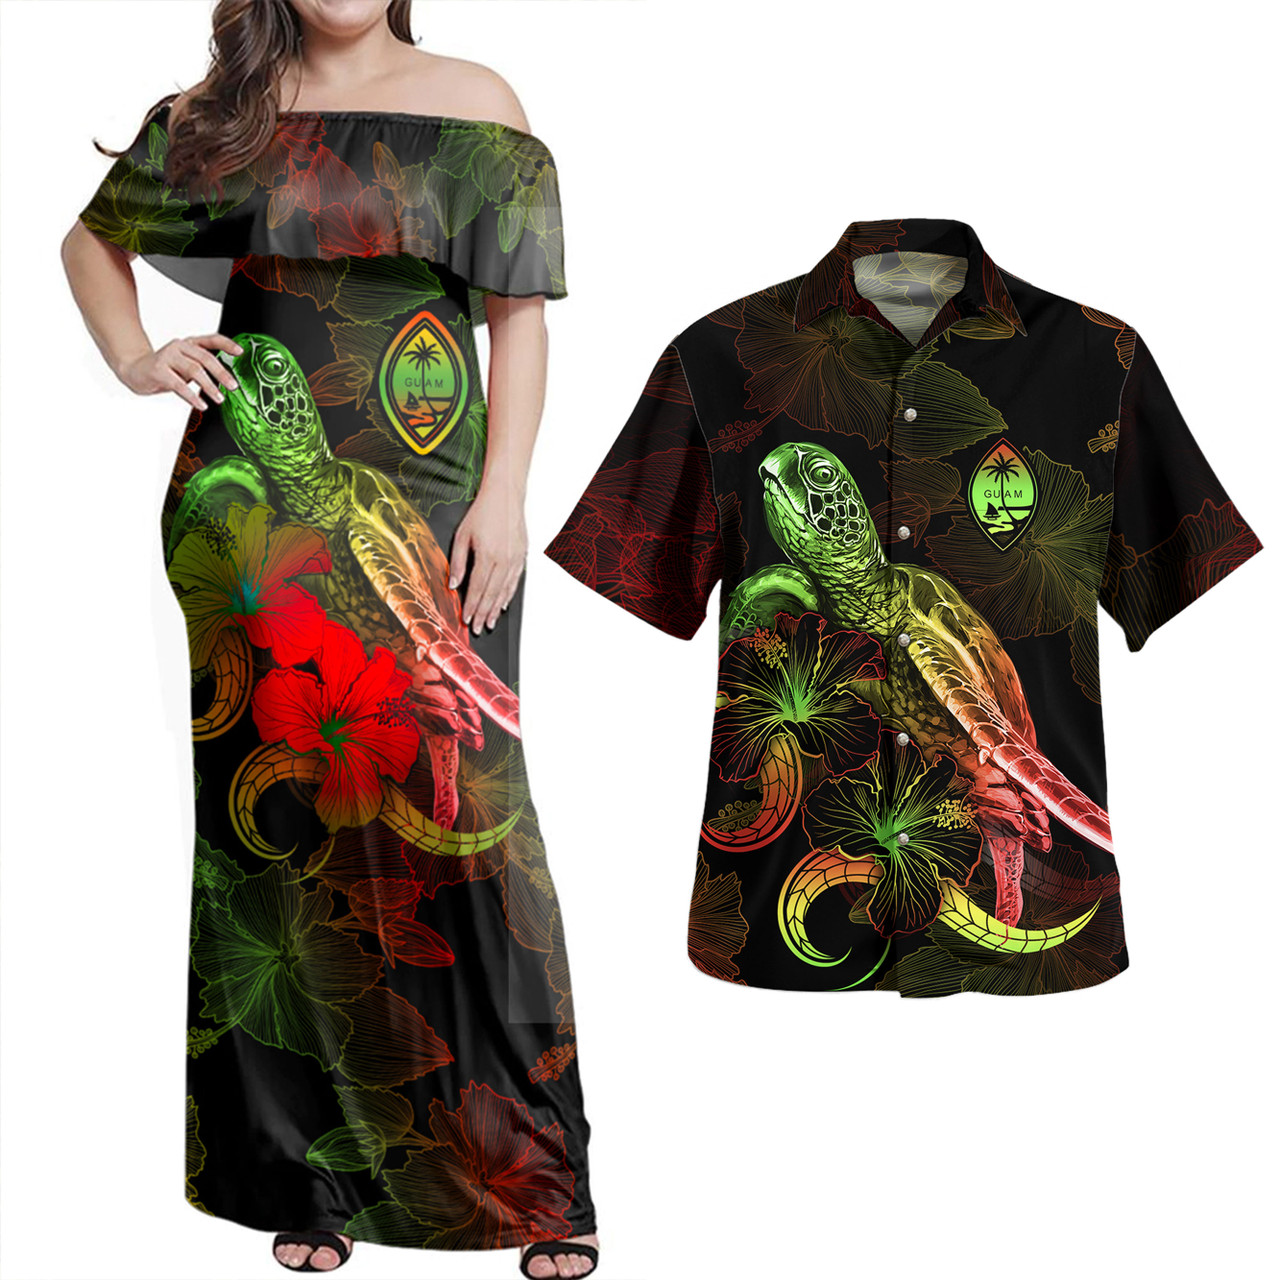 Guam Combo Dress And Shirt - Sea Turtle With Blooming Hibiscus Flowers Reggae